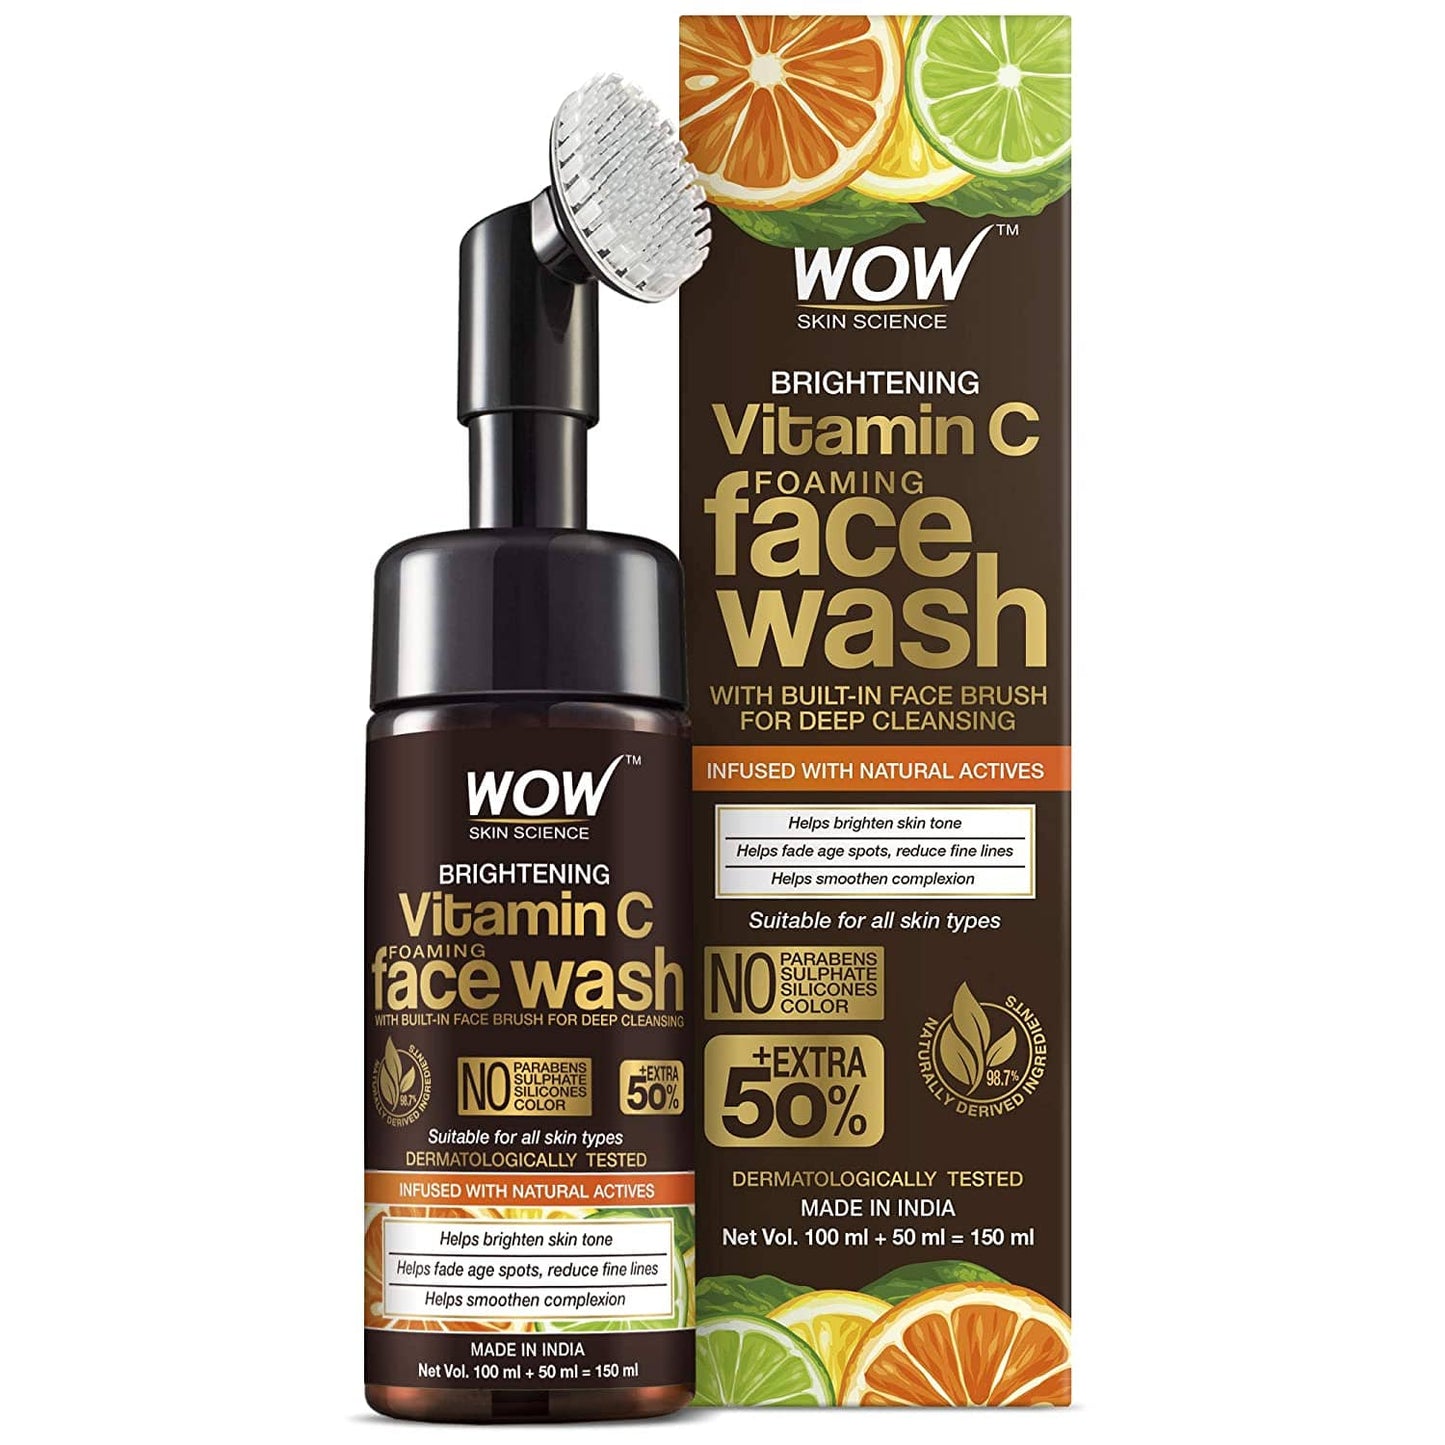 WOW Skin Science Brightening vitamin C Foaming face wash is a skin-reviving face wash that helps to refresh dull skin by gently removing layer of dead skin, and keeping excess sebum in check